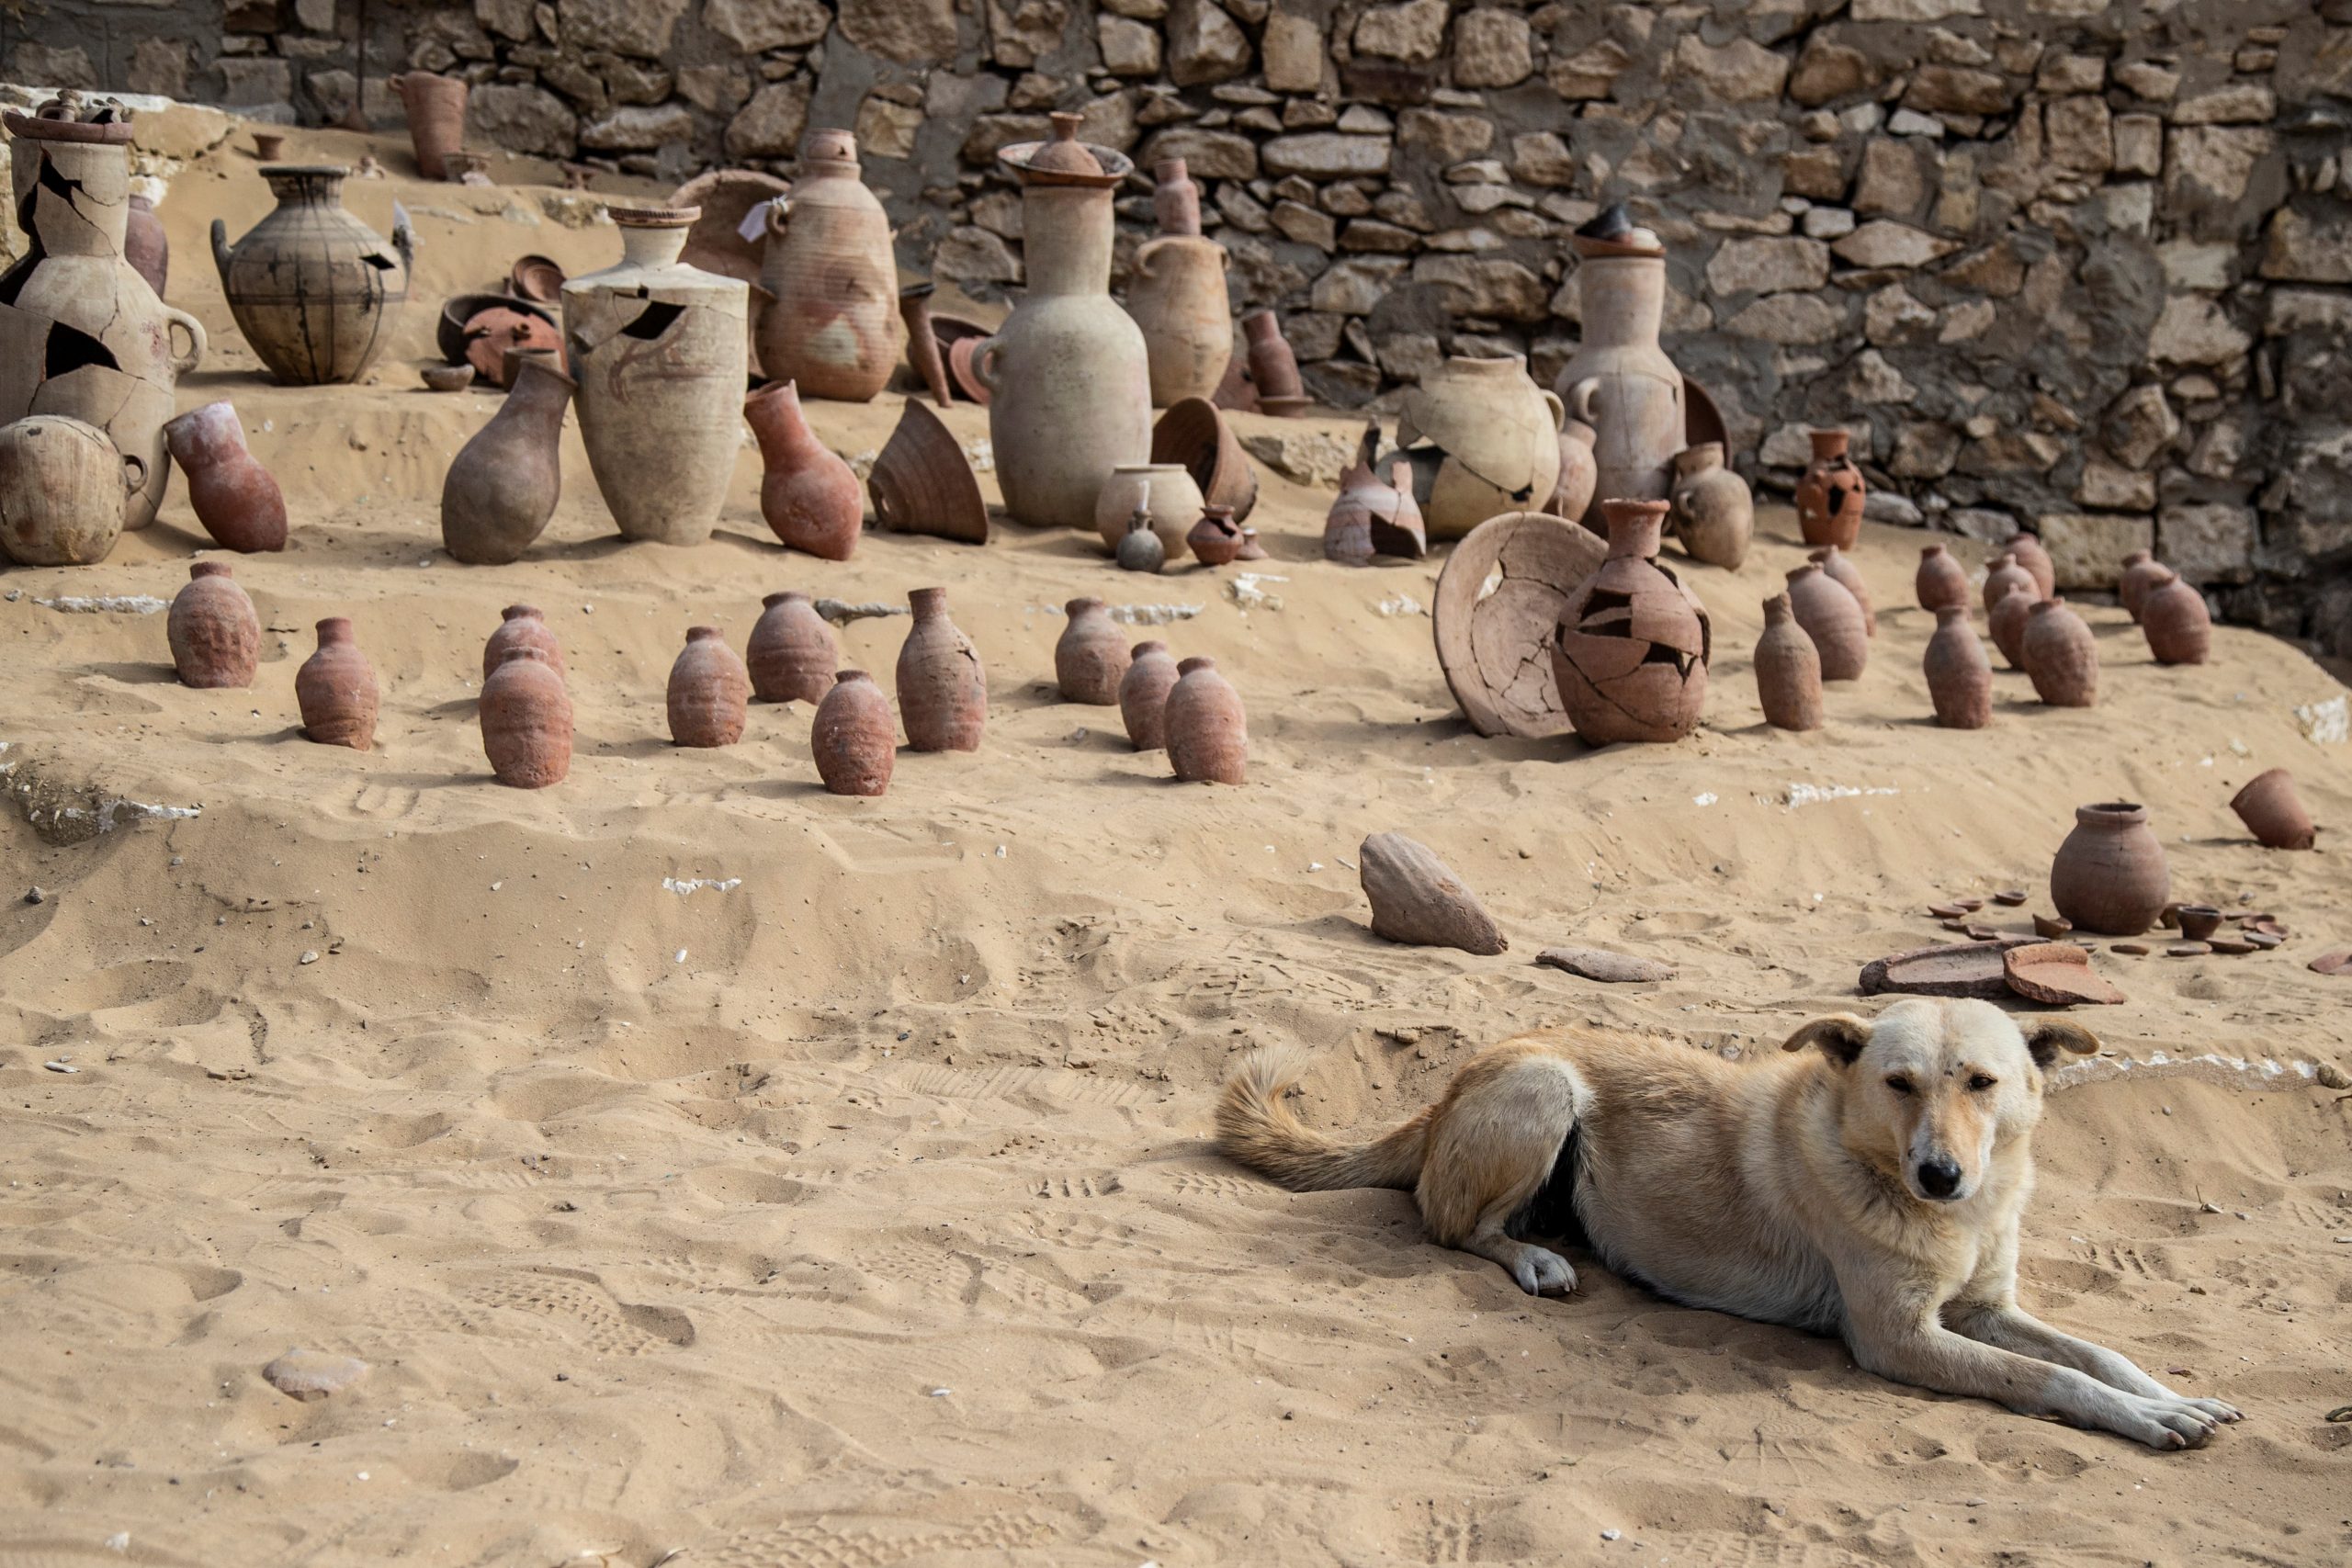 epa08943328 A dog sitting in front of the newly discovered pottery at funerary temple of Queen Nearit, the wife of King Teti  in the Saqqara archaeological site next to the Pyramid of King Teti in Giza, Egypt, 17 January 2021. It was announced on 16 January 2021 that the  Zahi Hawass Center at Bibliotheca Alexandrina and the Ministry of Antiquities have discovered the Funerary temple of Queen Naerit along with other important discoveries that will help Egyptologists better understand the Old and New Kingdoms of Dynastic Egypt.  EPA/Mohamed Hossam